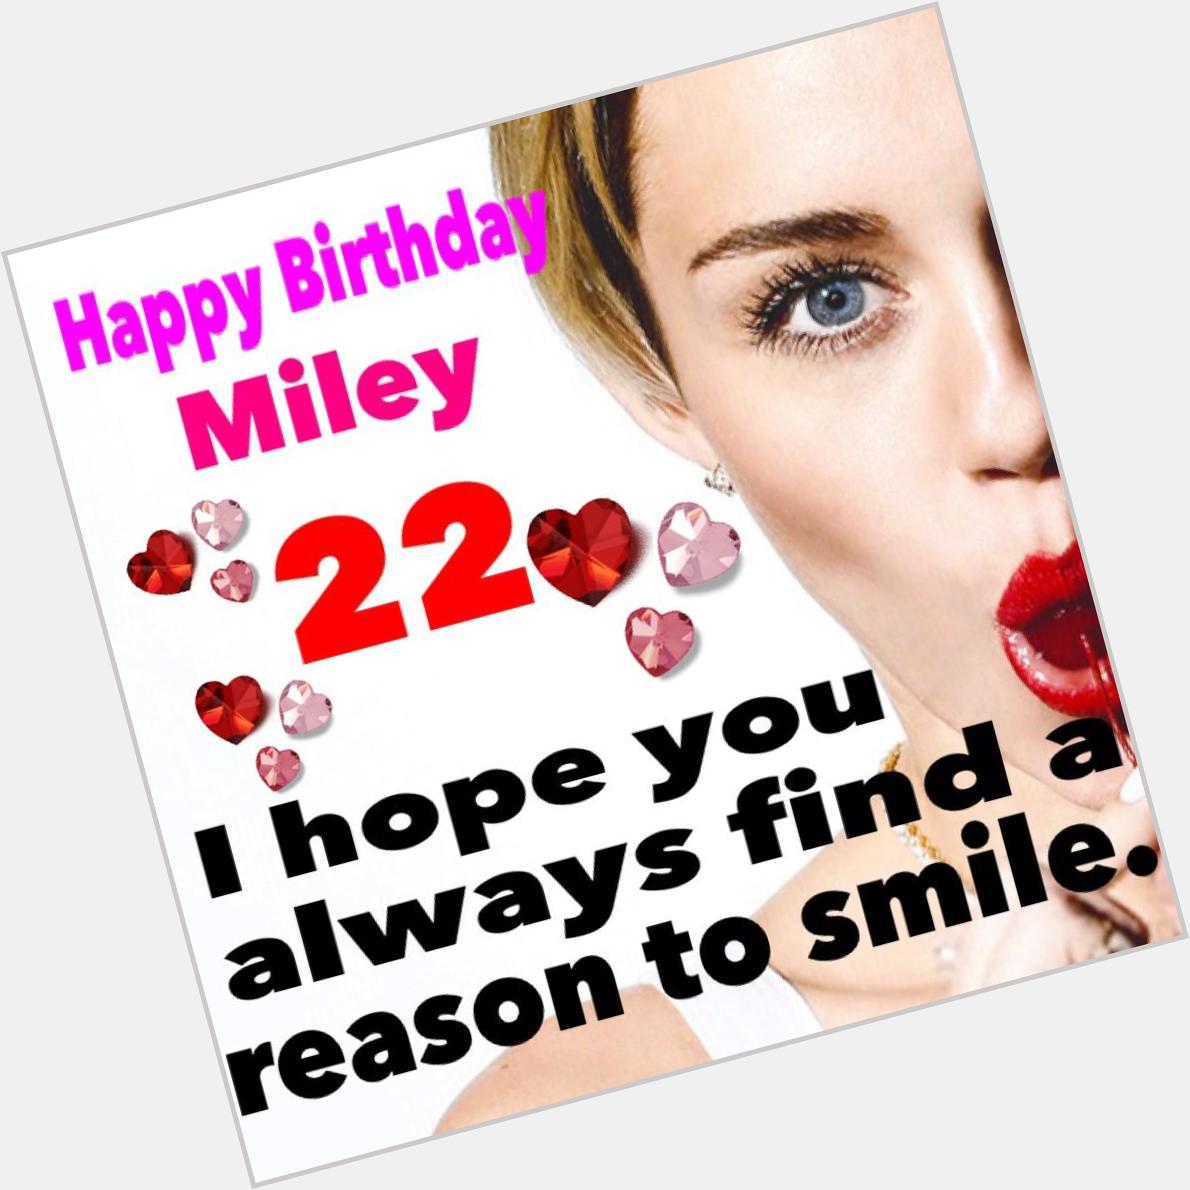  Happy 22th Birthday Miley   With love from Japan    Miley Cyrus 